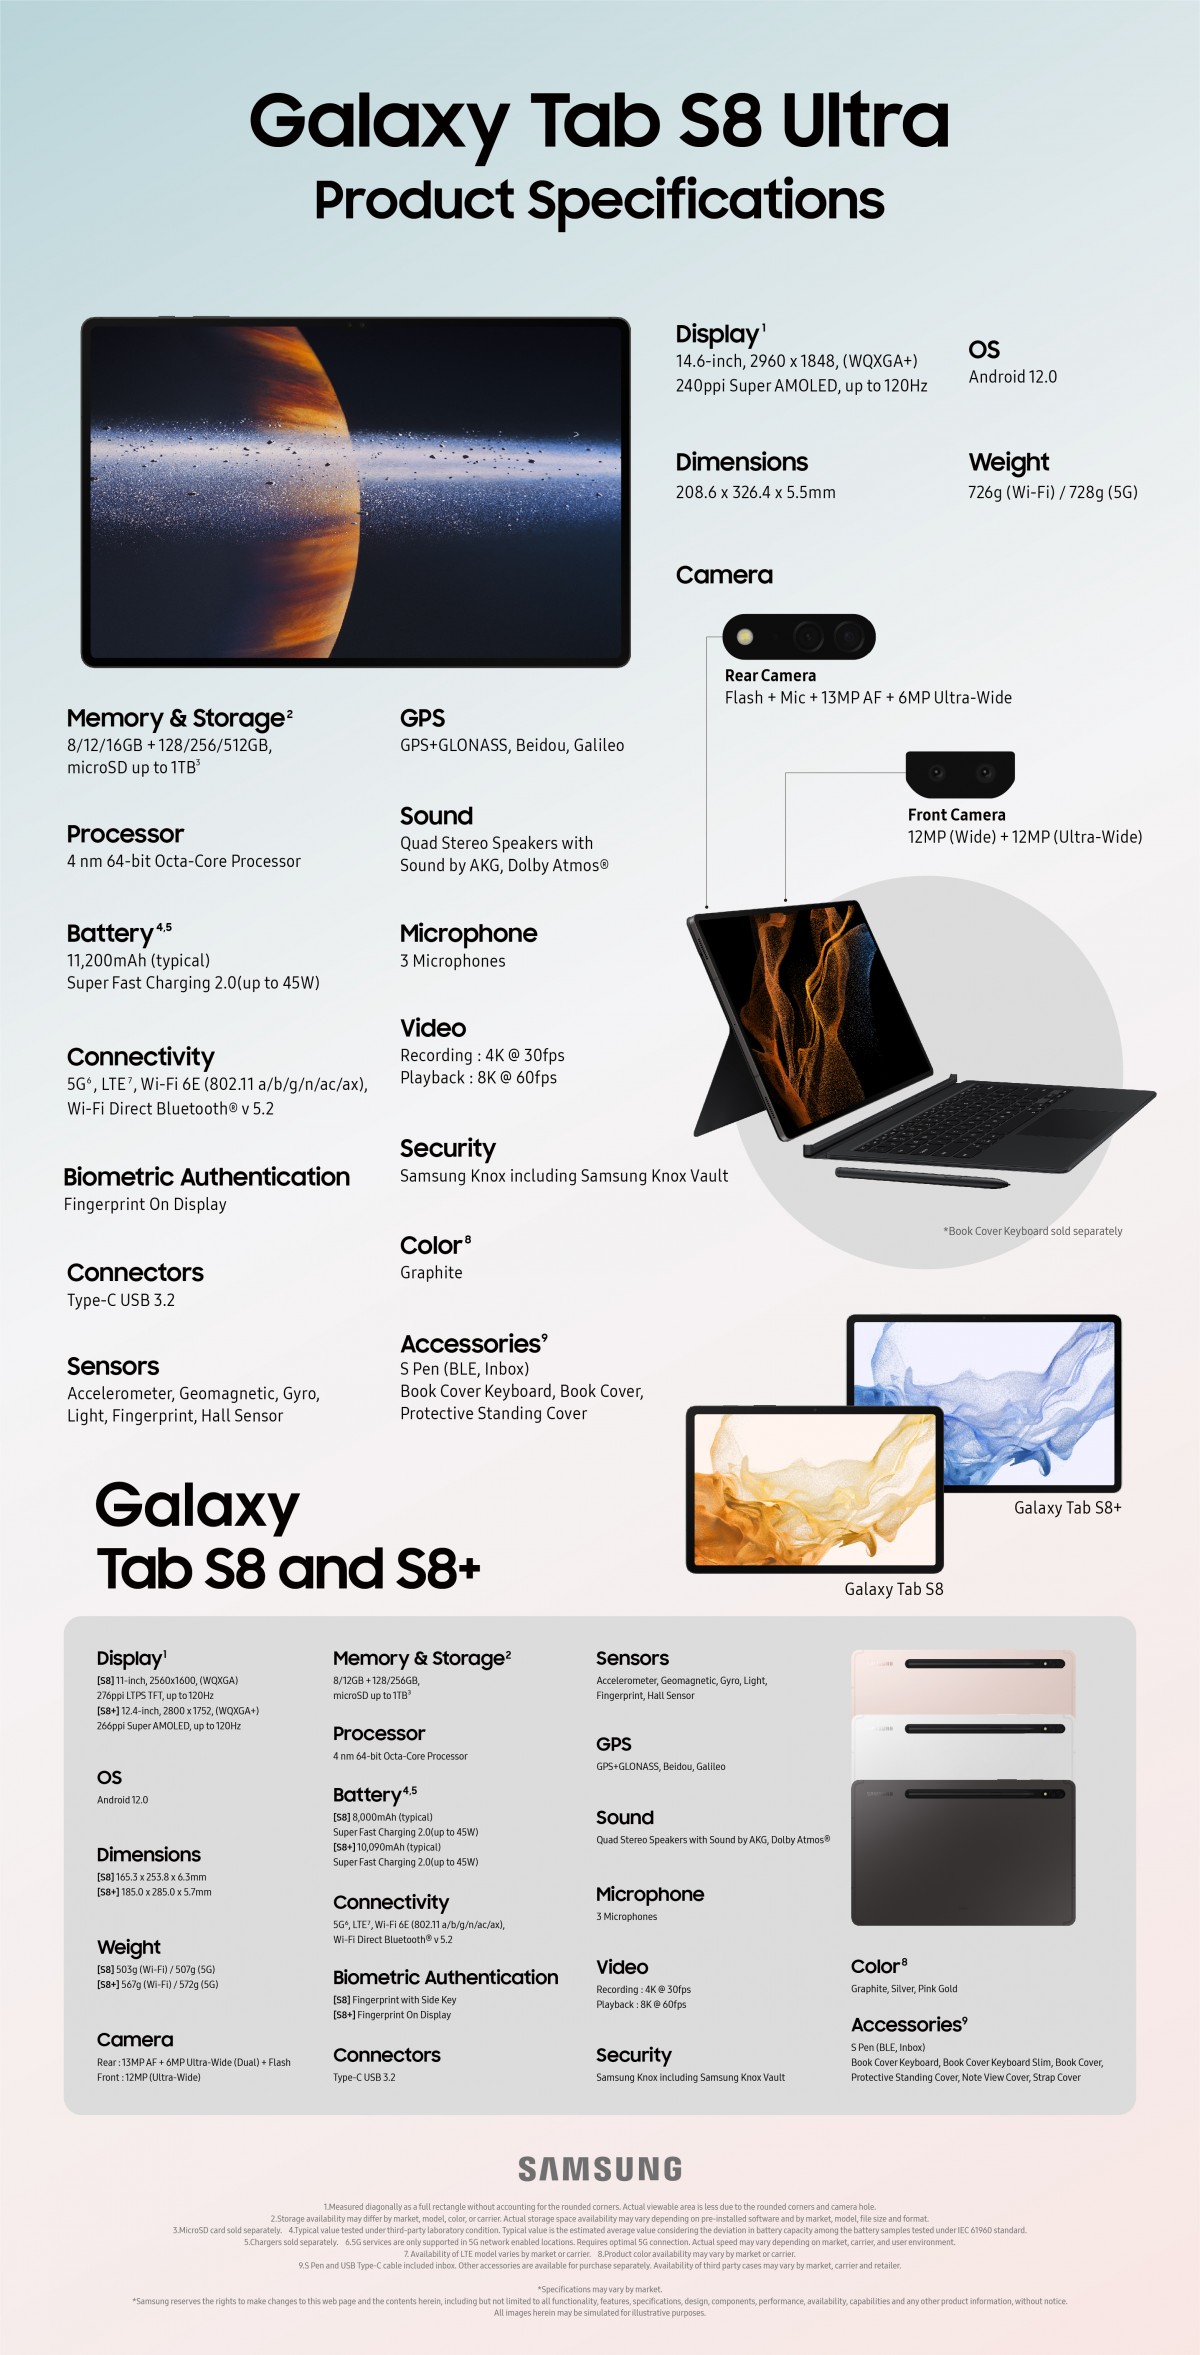 Samsung publishes specs infographics for the Galaxy S22 Ultra and Galaxy Tab S8 series